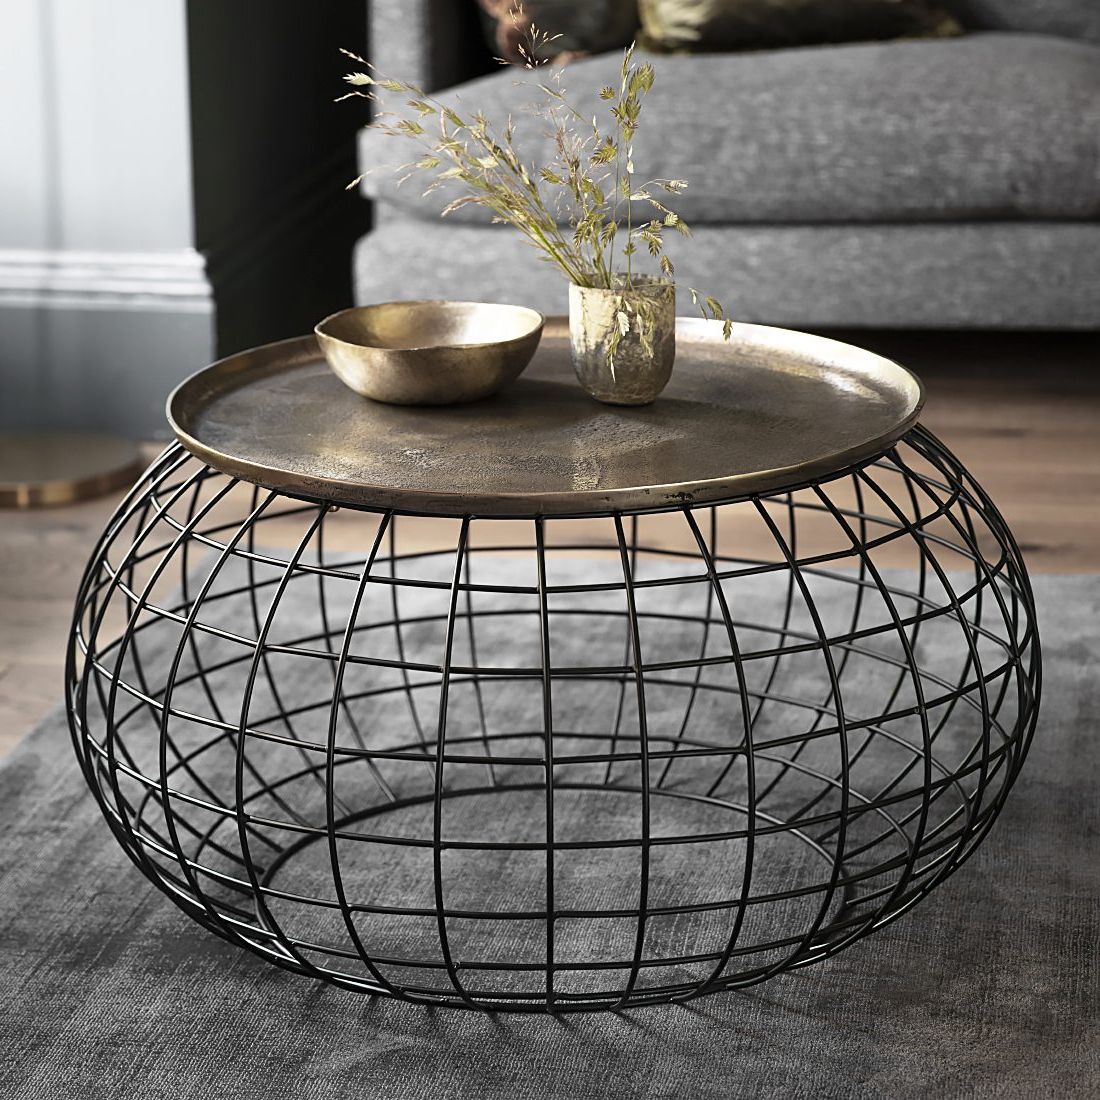 Most Popular Antique Brass Aluminum Round Coffee Tables Inside Round Metal Cage Coffee Table With Gold Tray Top (Gallery 14 of 20)